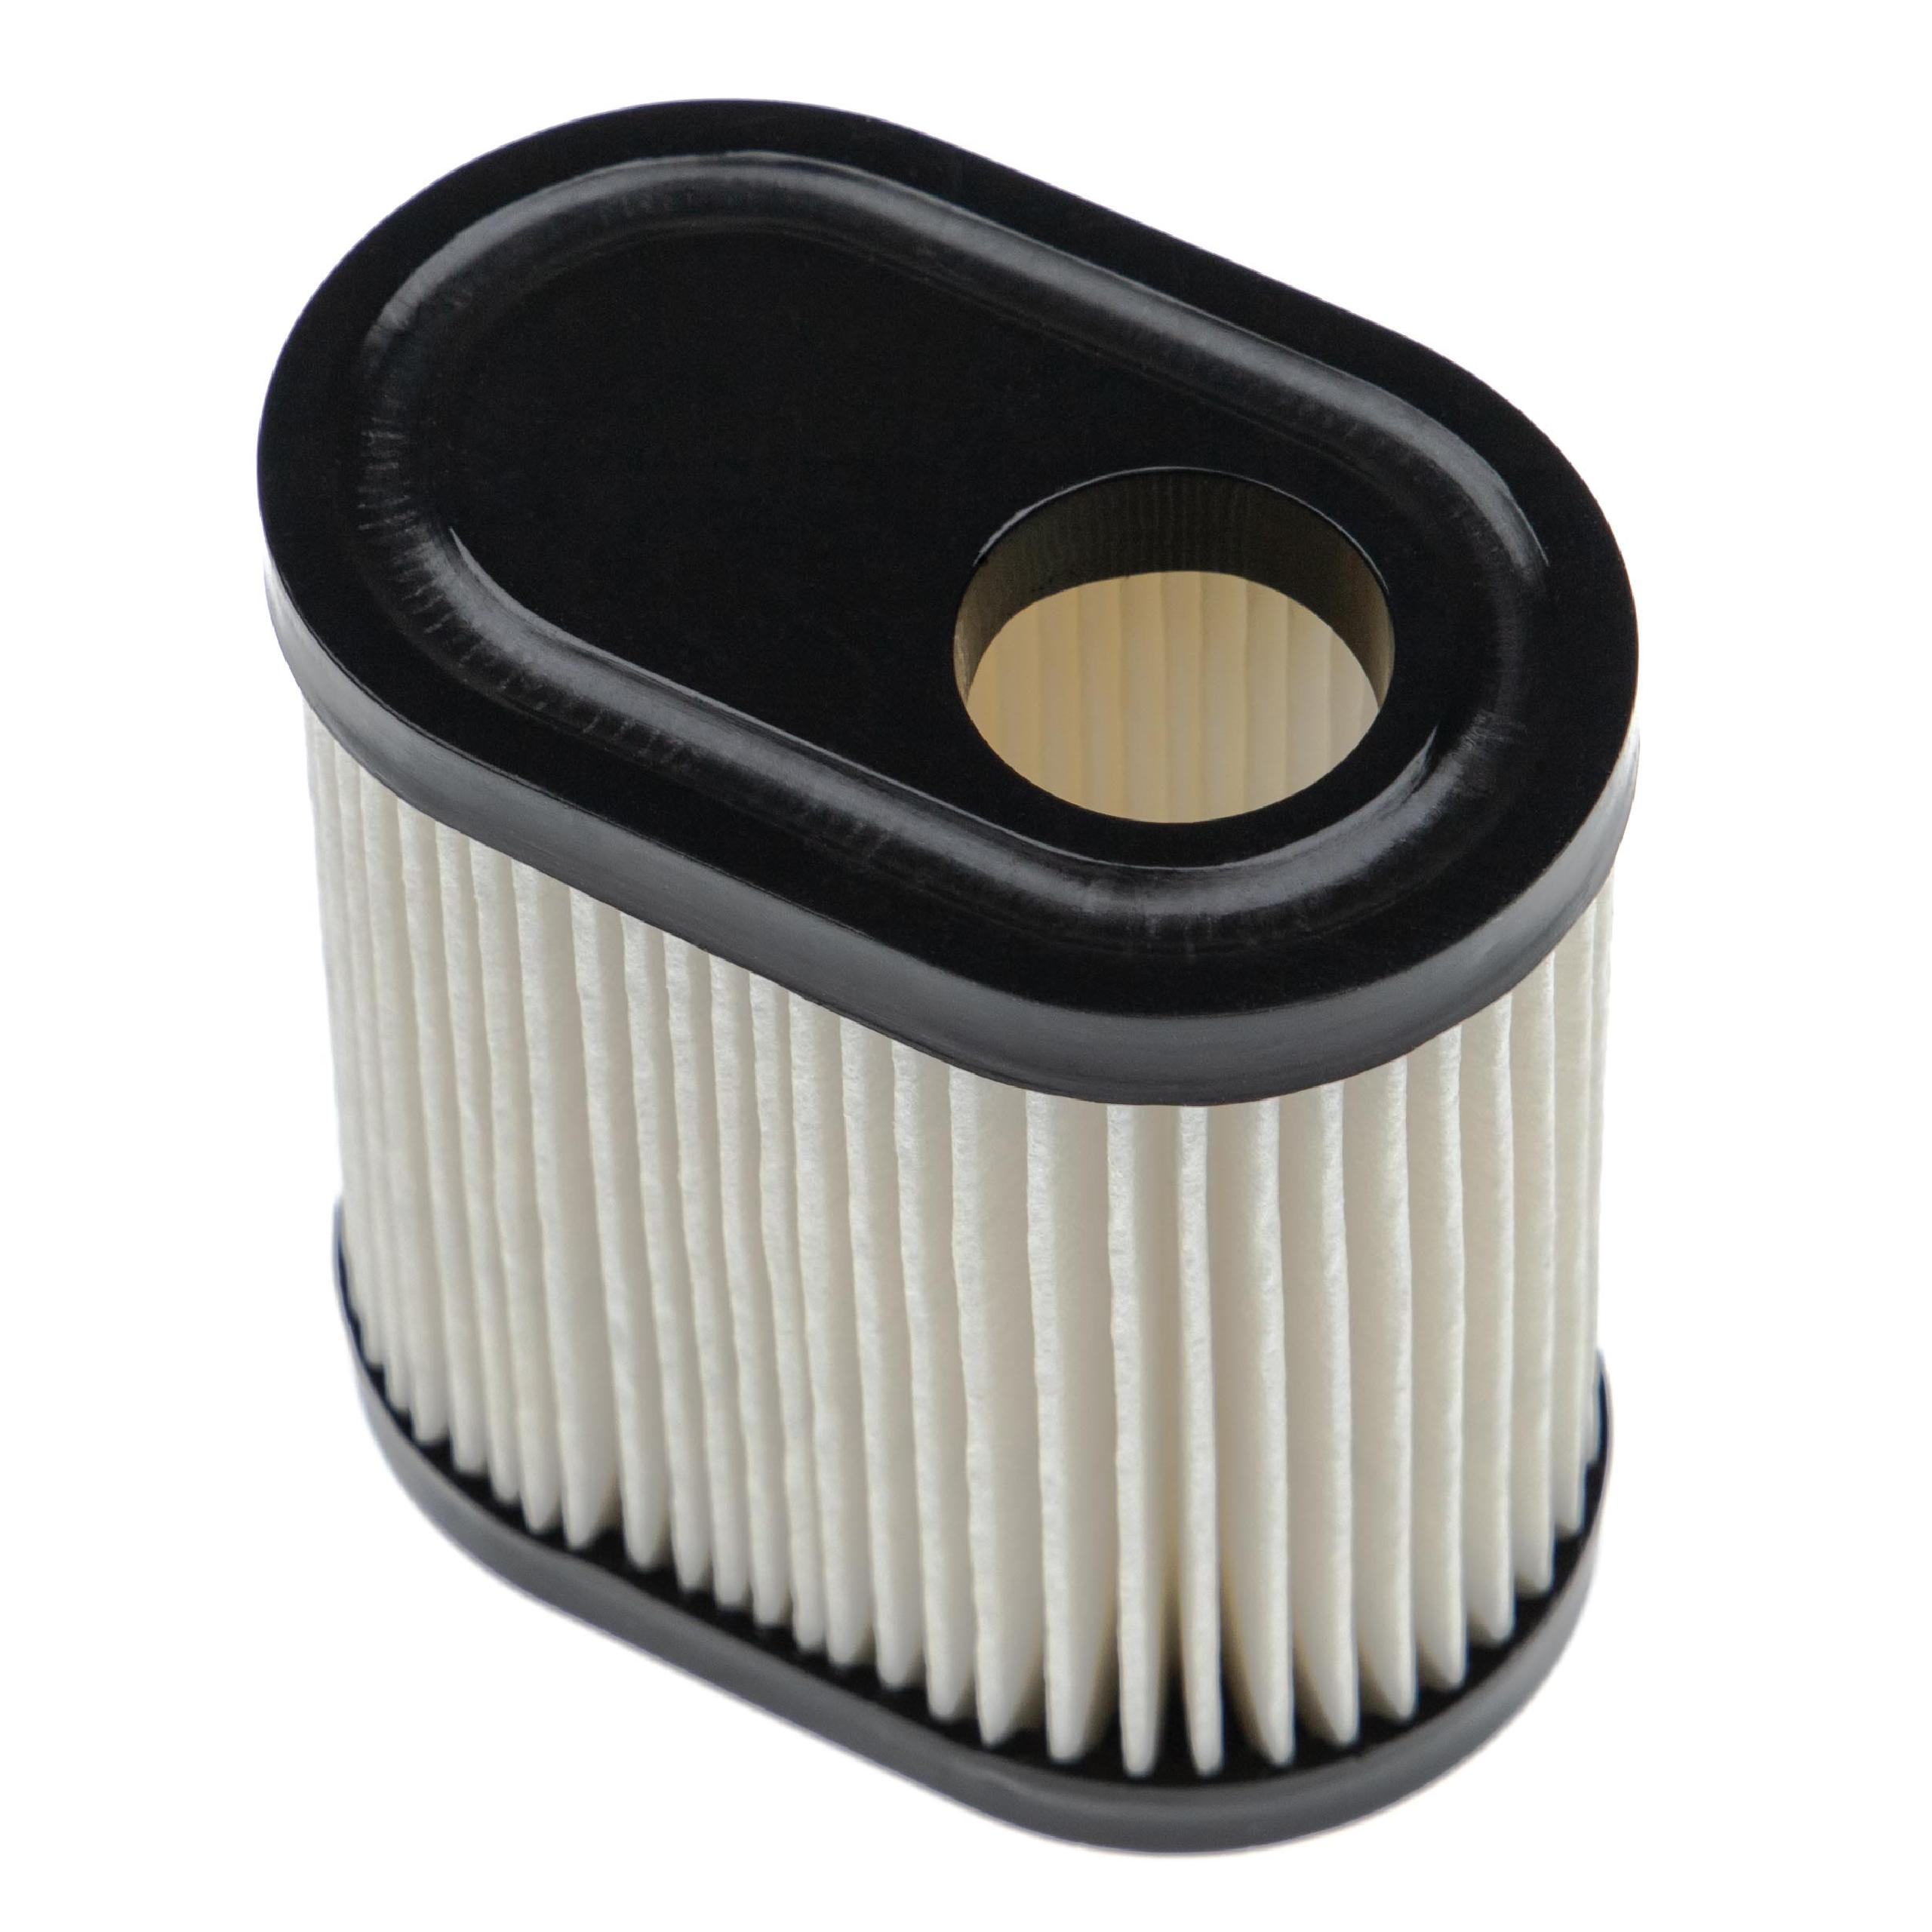 vhbw Replacement Air Filter Replacement for Tecumseh 36905, 740083A for Motor